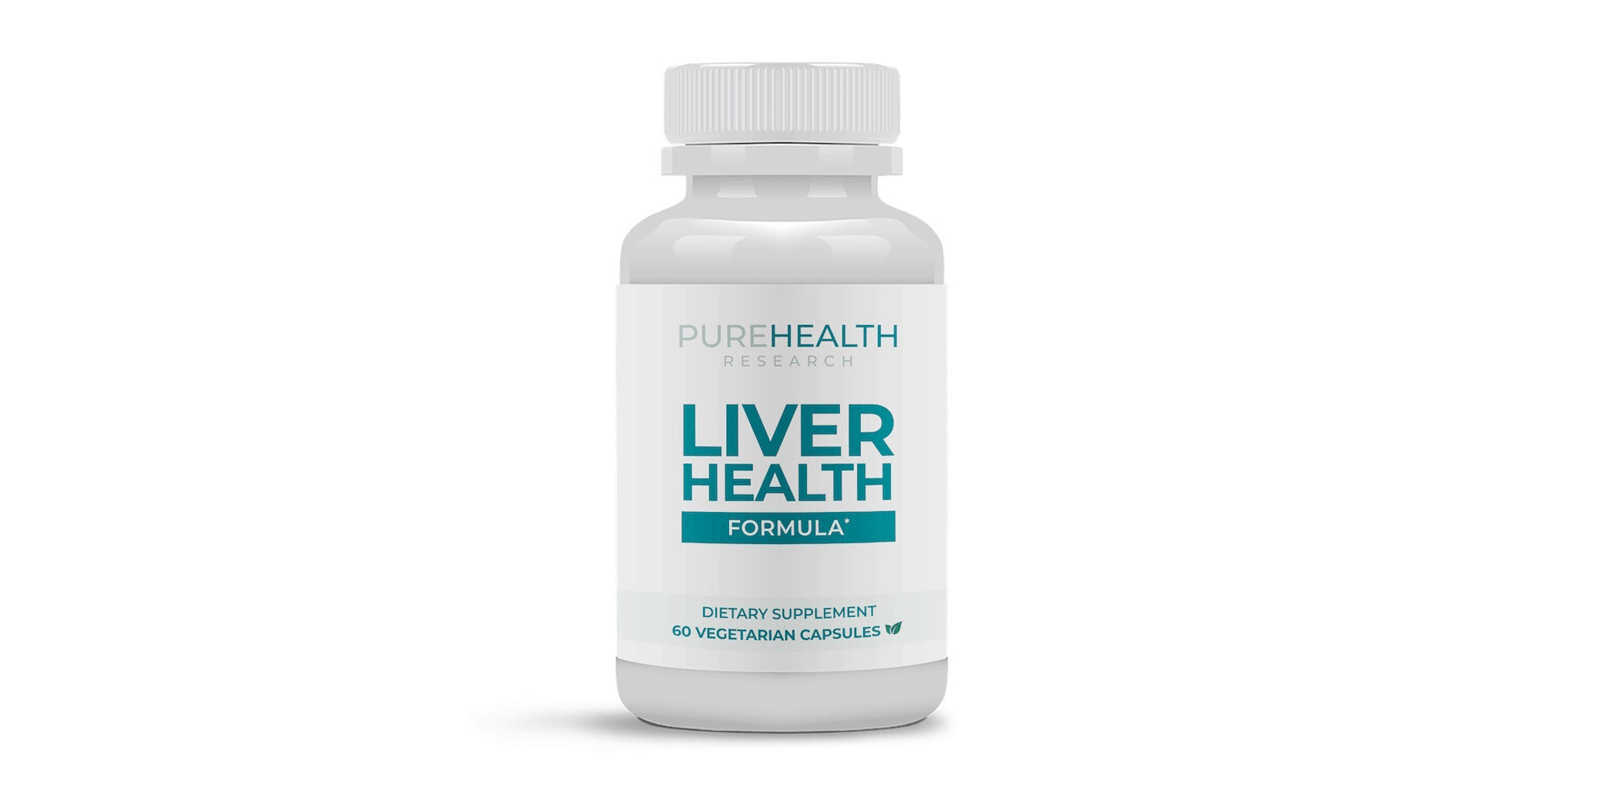 Liver Health Formula Reviews - Is PureHealth Research's Liver Health Formula Safe to Use and Effective?